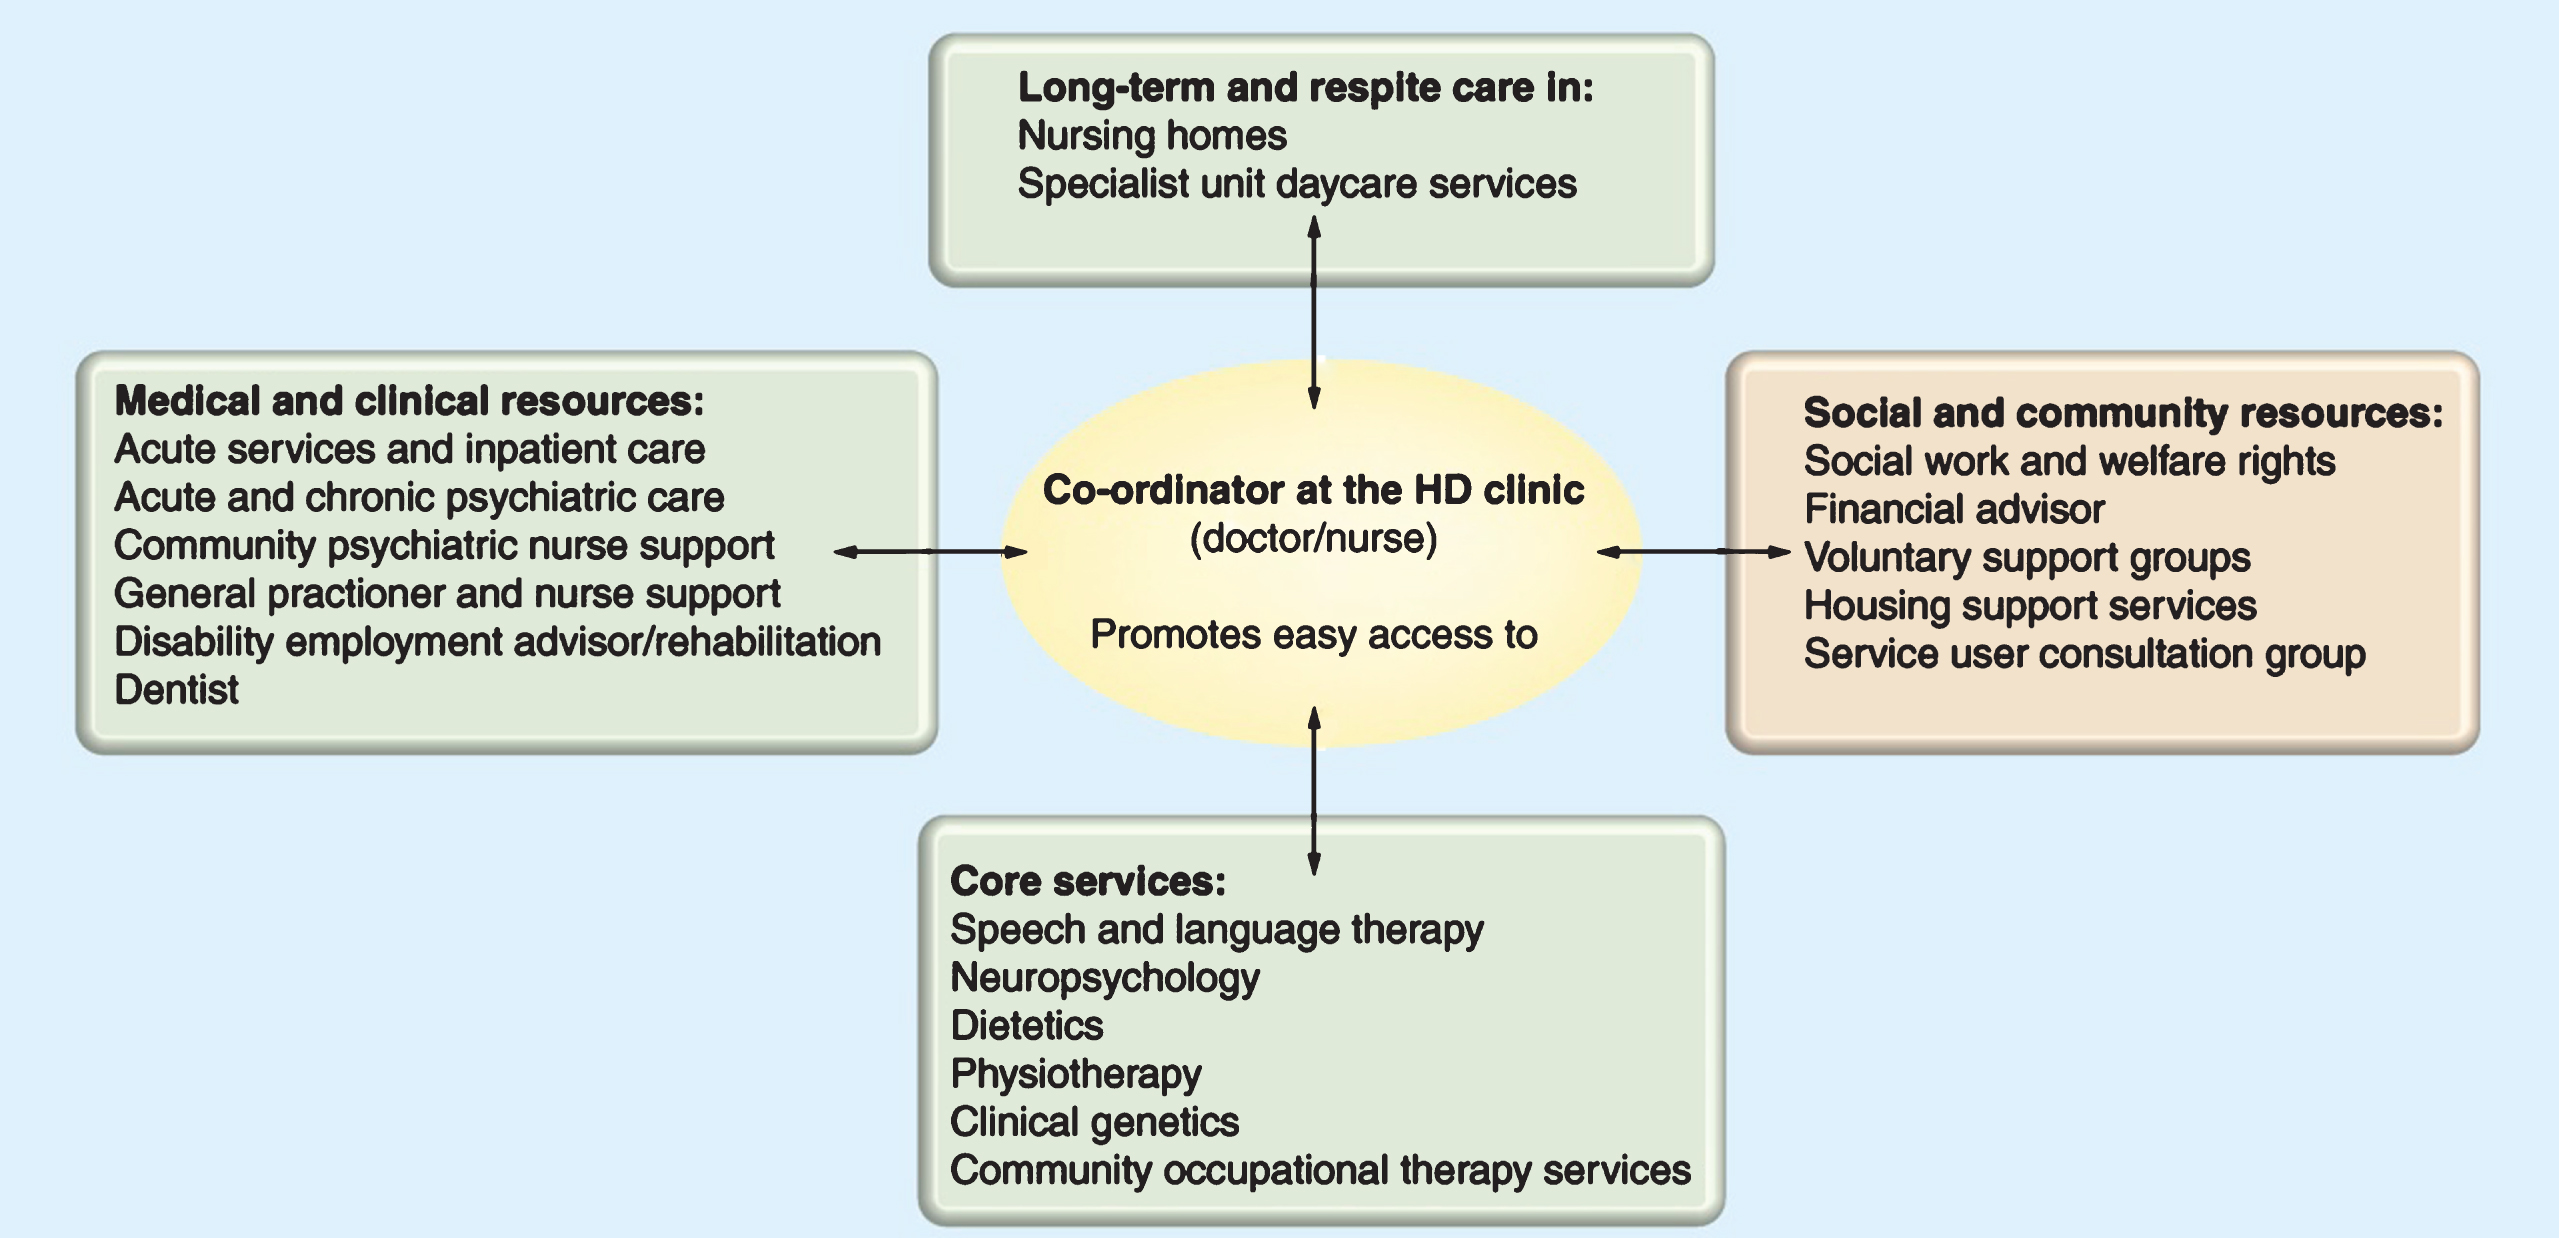 The care pathway within a managed care network. Redrawn with permission from the European Huntington’s Disease Network Standards of Care Working Group. https://www.futuremedicine.com/doi/pdf/10.2217/nmt.11.85
